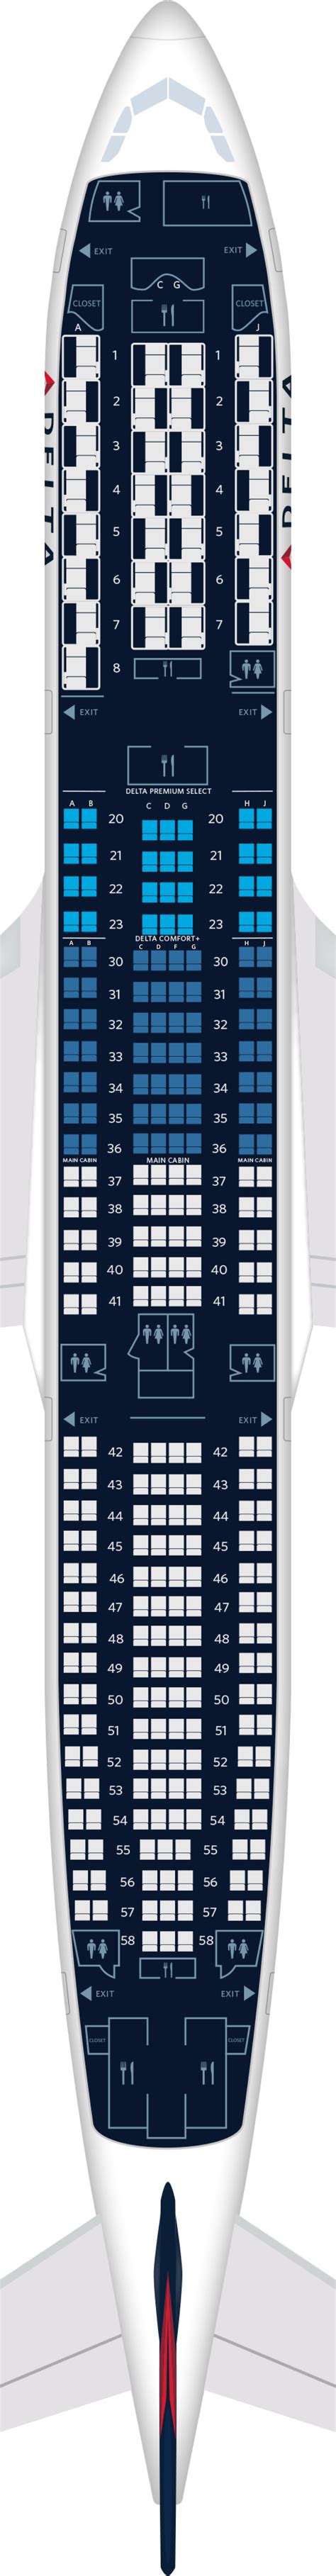 Delta Airbus A330 900neo Seat Map